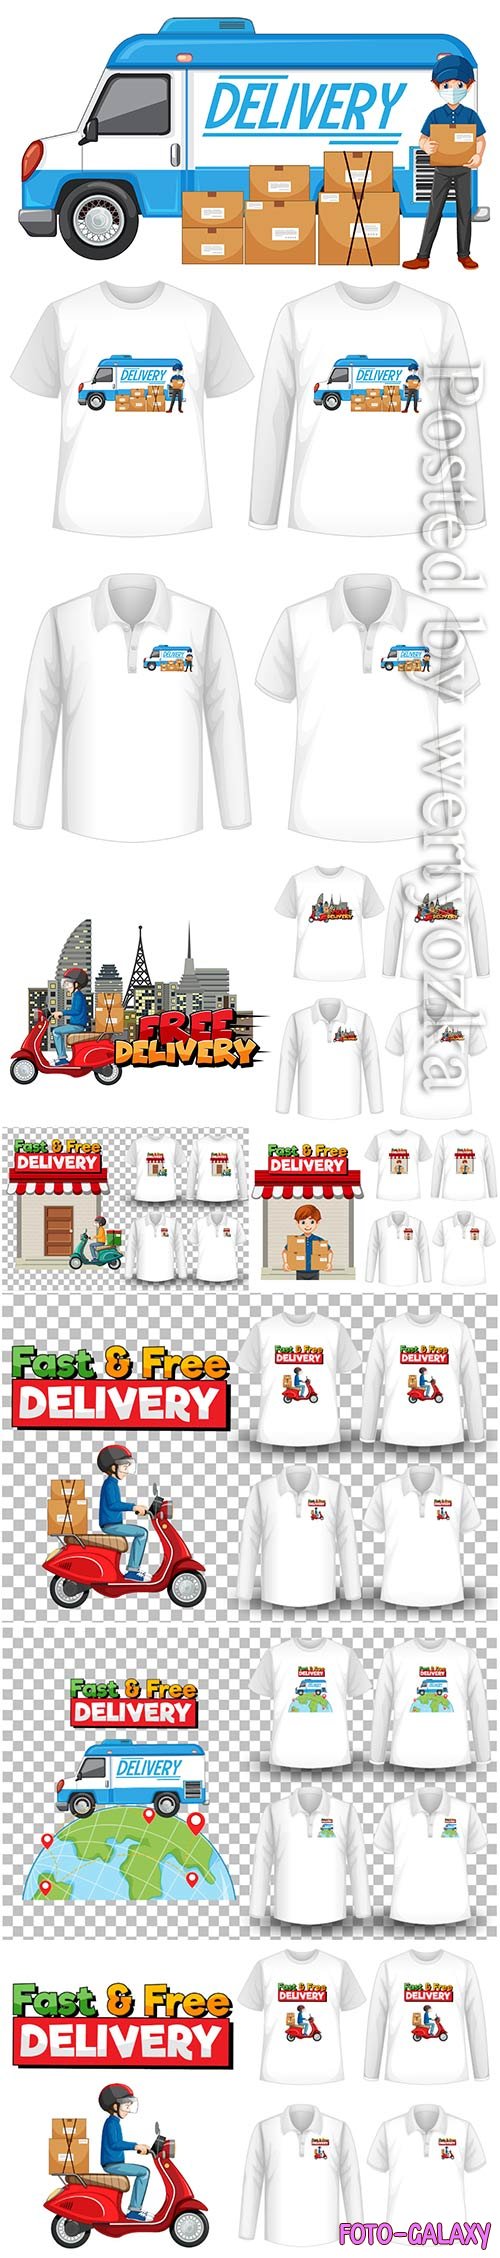 Set of mockup shirt with delivery theme in vector